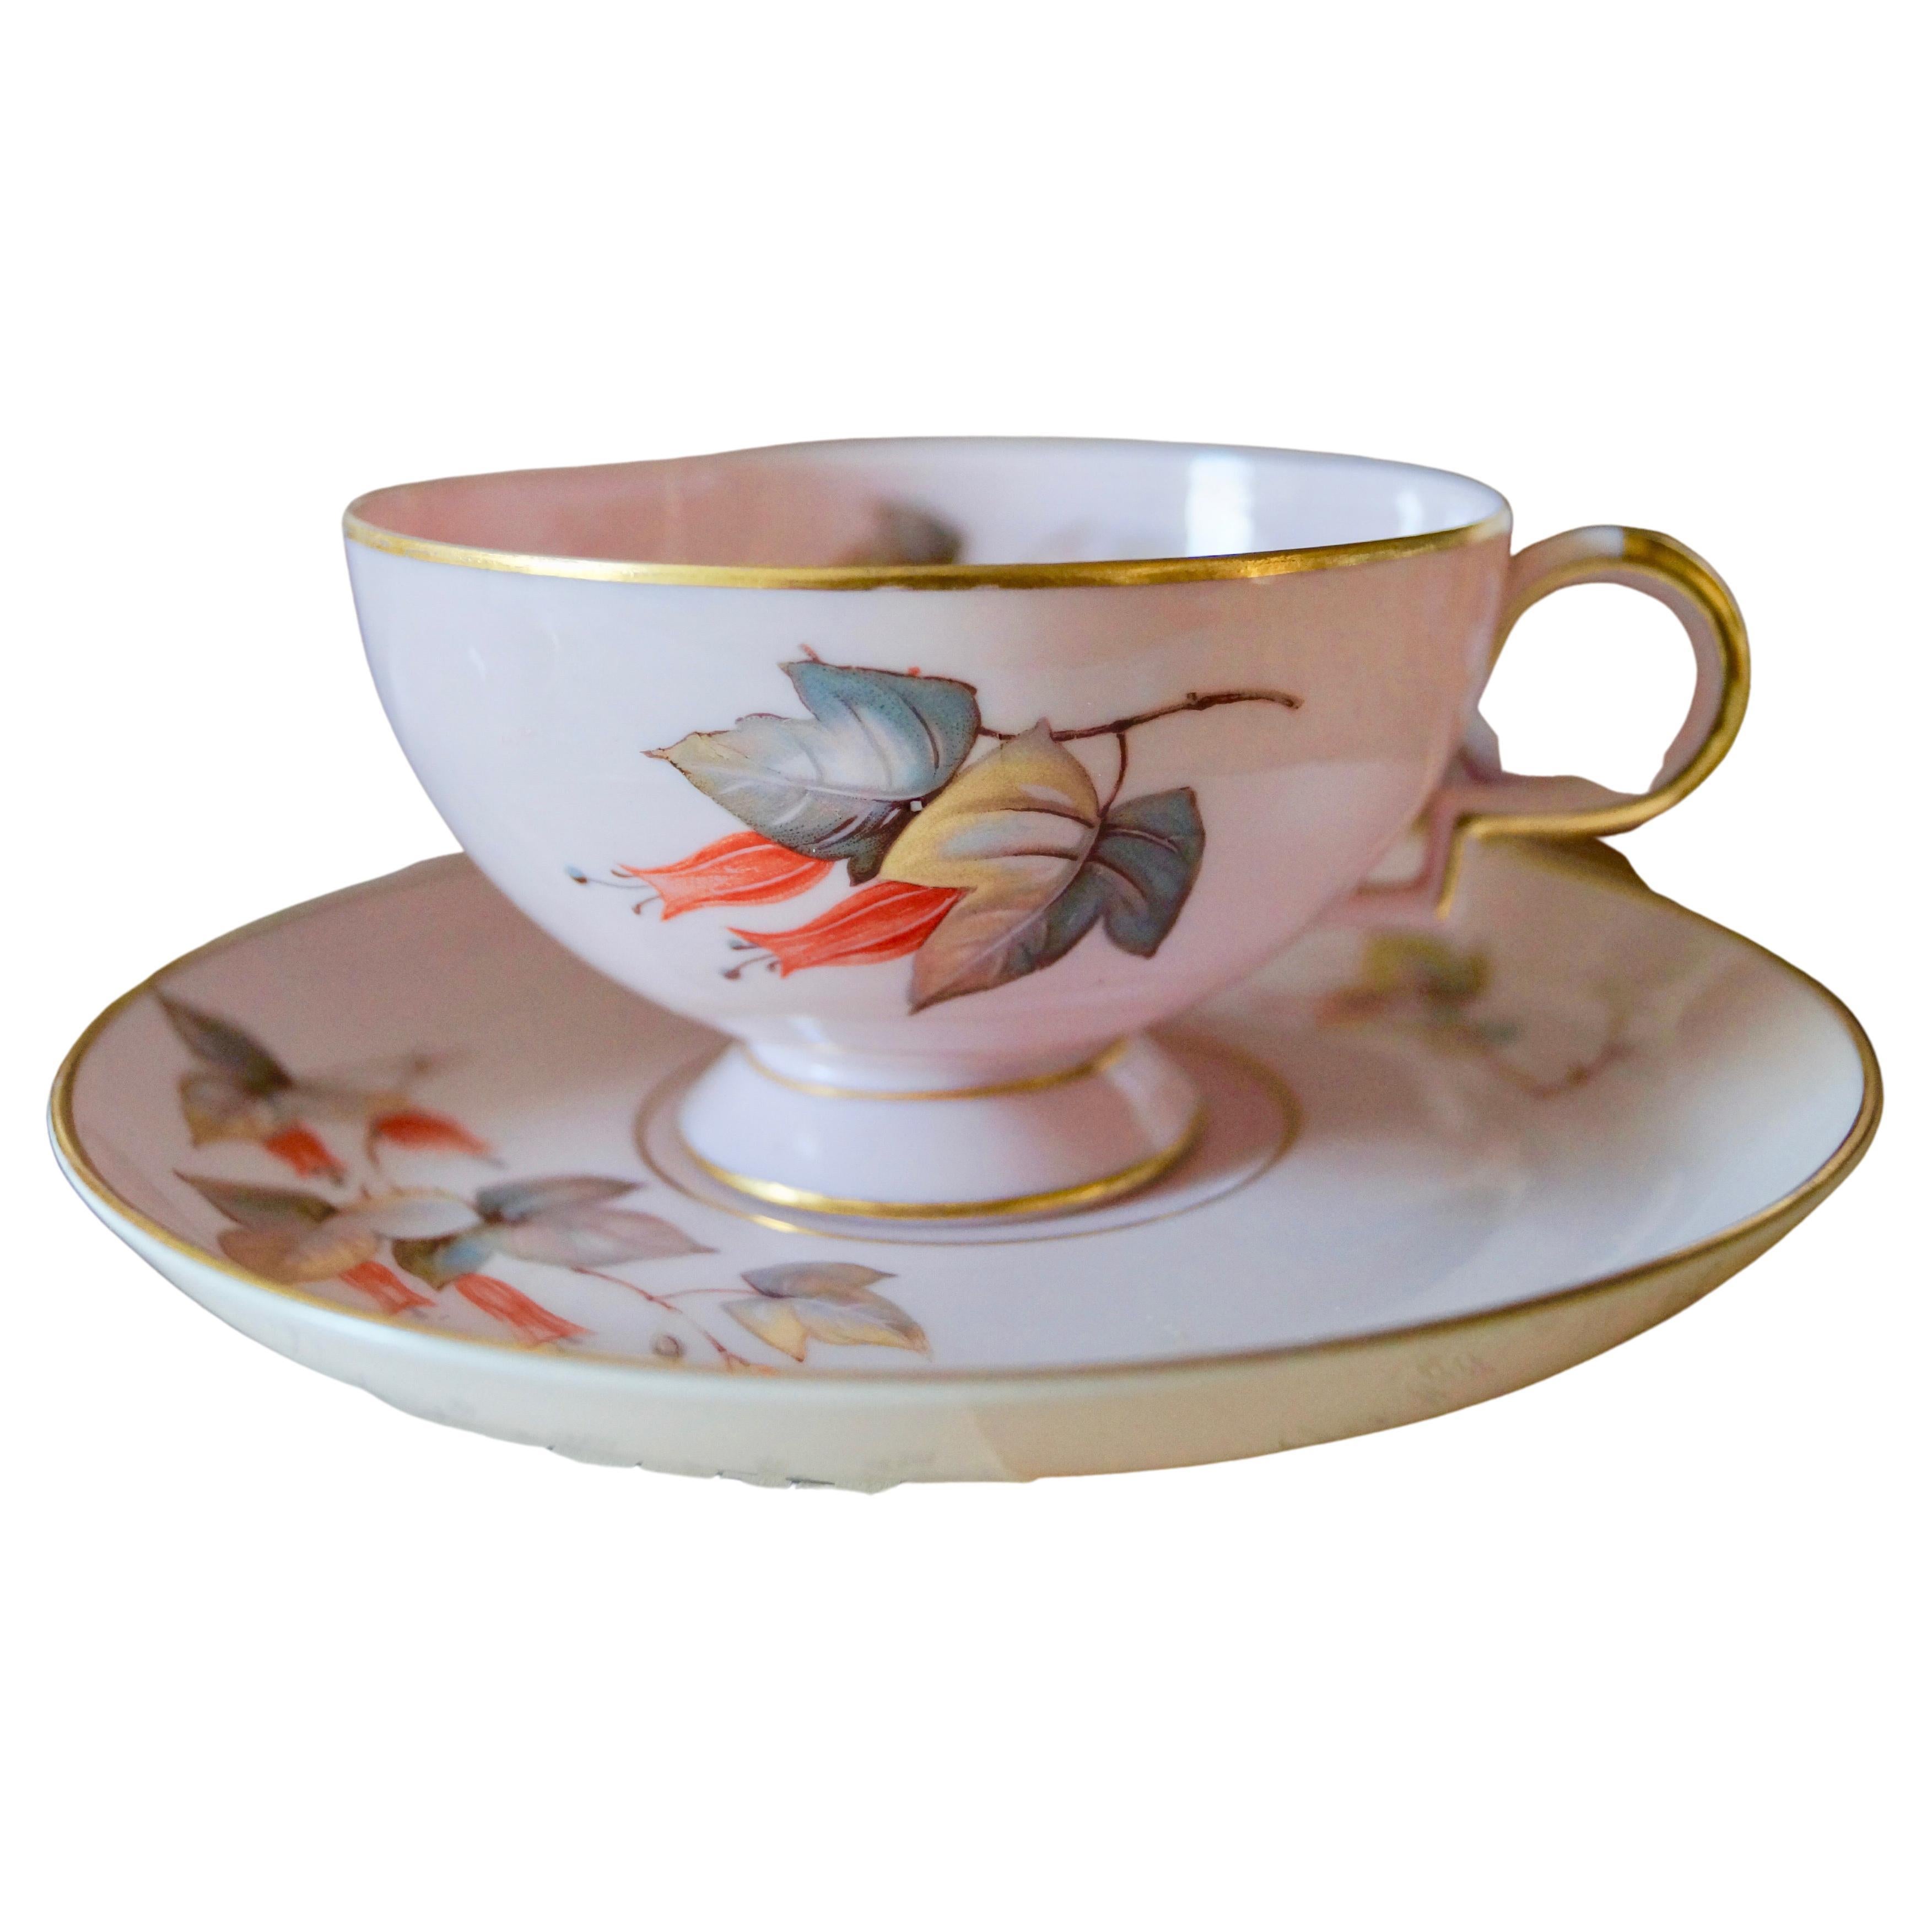 Beautiful vintage Jean Haviland porcelain Tea and Luncheon set for 12 persons (the tea set for 6!)

The set has a pink underground porcelain and hand decorated with a transfer print with Lamprocanos Spectabilles flower pattern and finished with